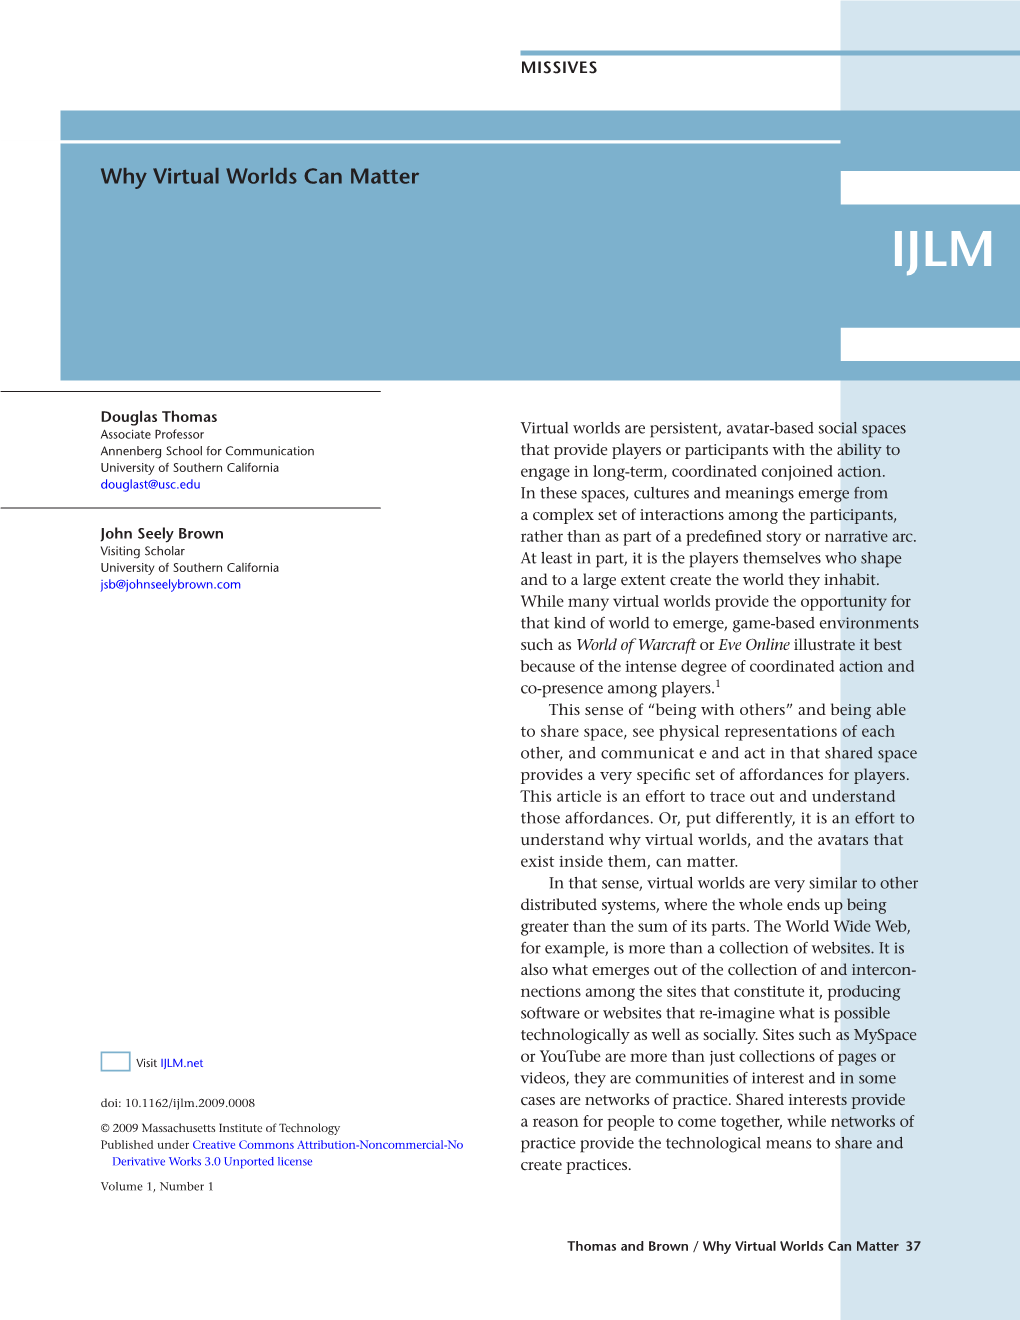 Why Virtual Worlds Can Matter IJLM